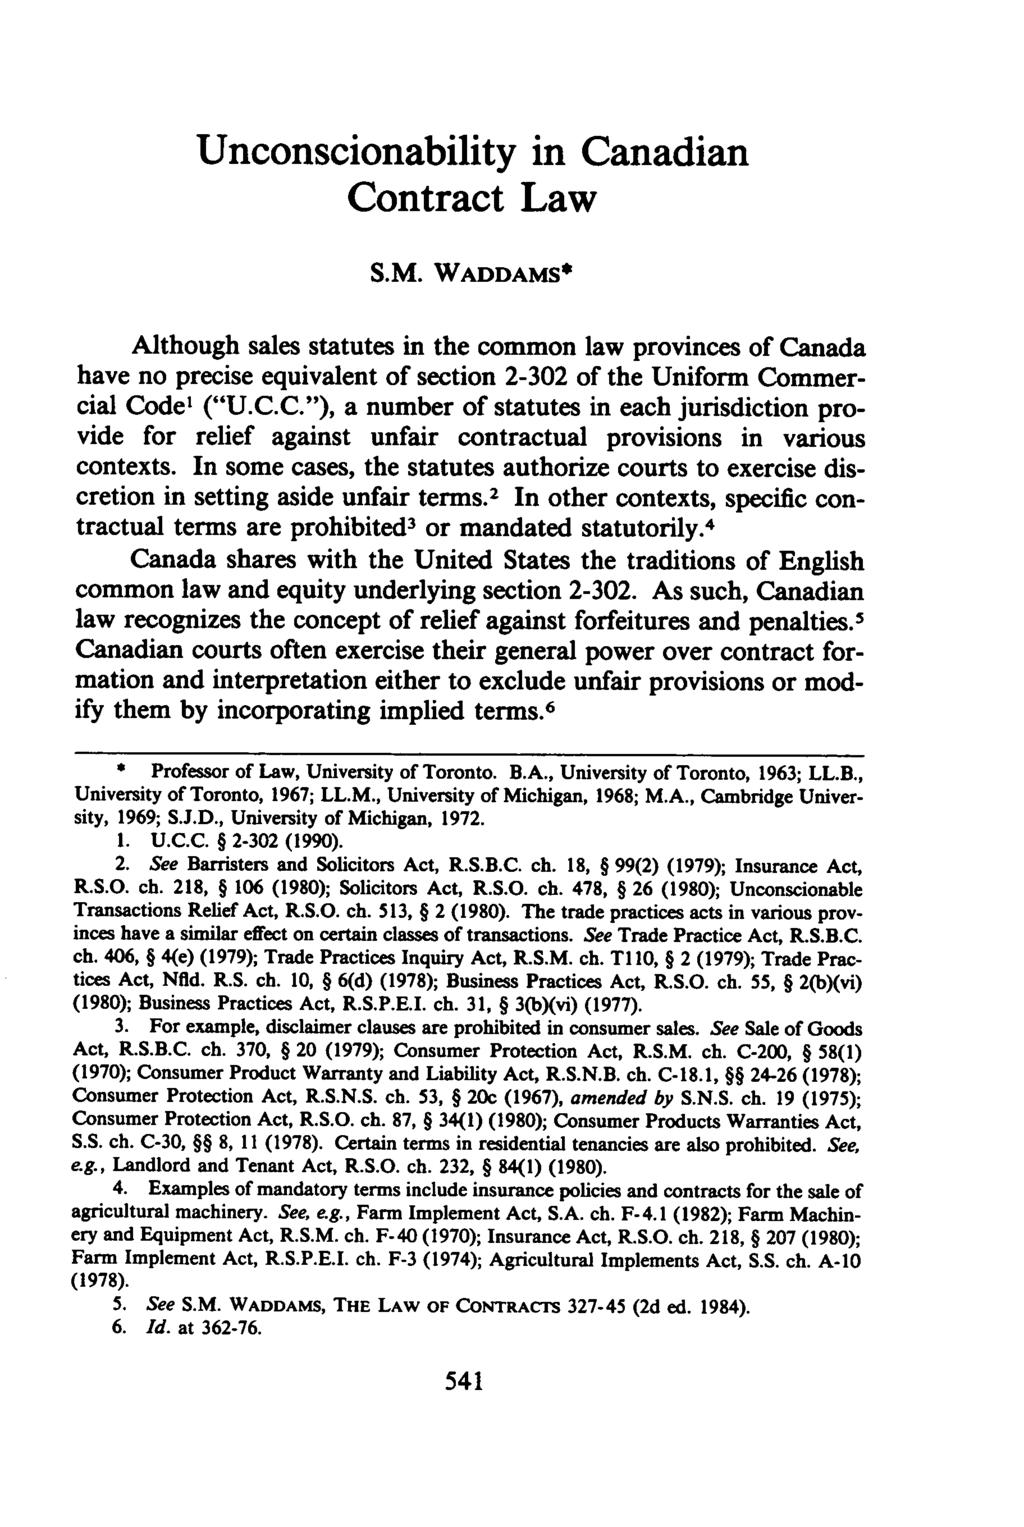 Unconscionability in Canadian Contract Law S.M. WADDAMS* Although sales statutes in the common law provinces of Canada have no precise equivalent of section 2-302 of the Uniform Commercial Code' ("U.